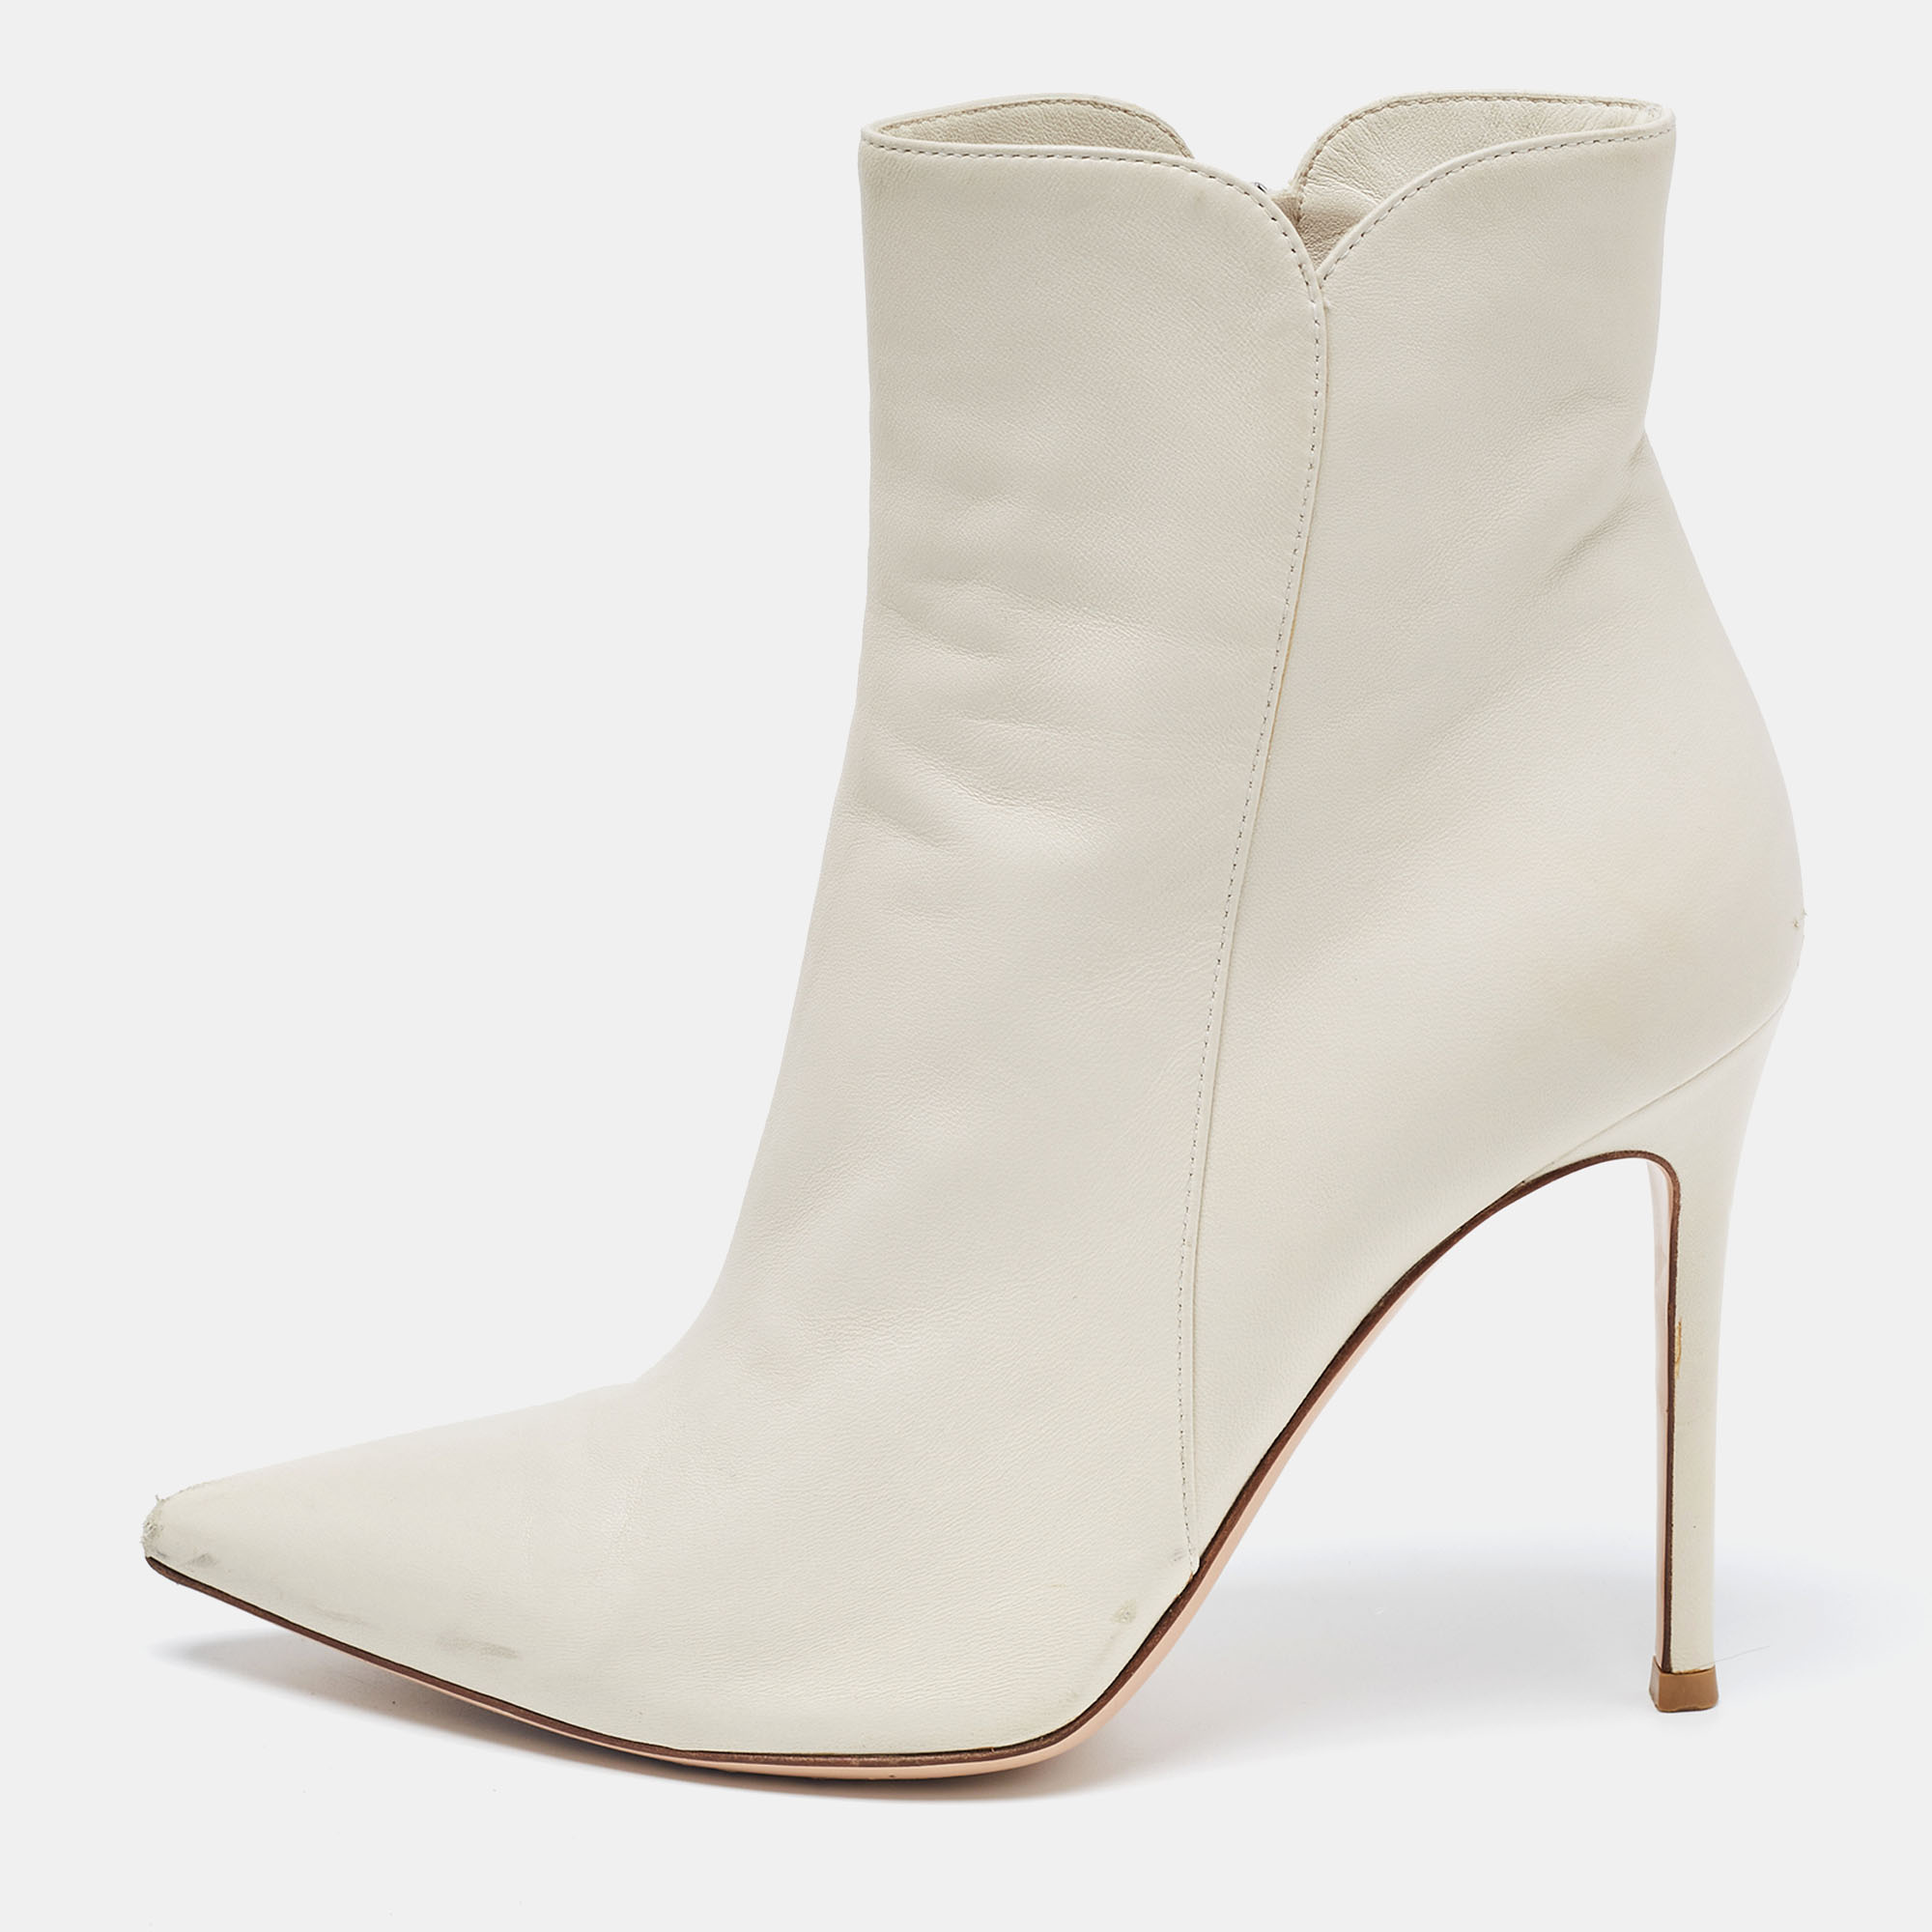 Pre-owned Gianvito Rossi Off White Leather Ankle Boots Size 38